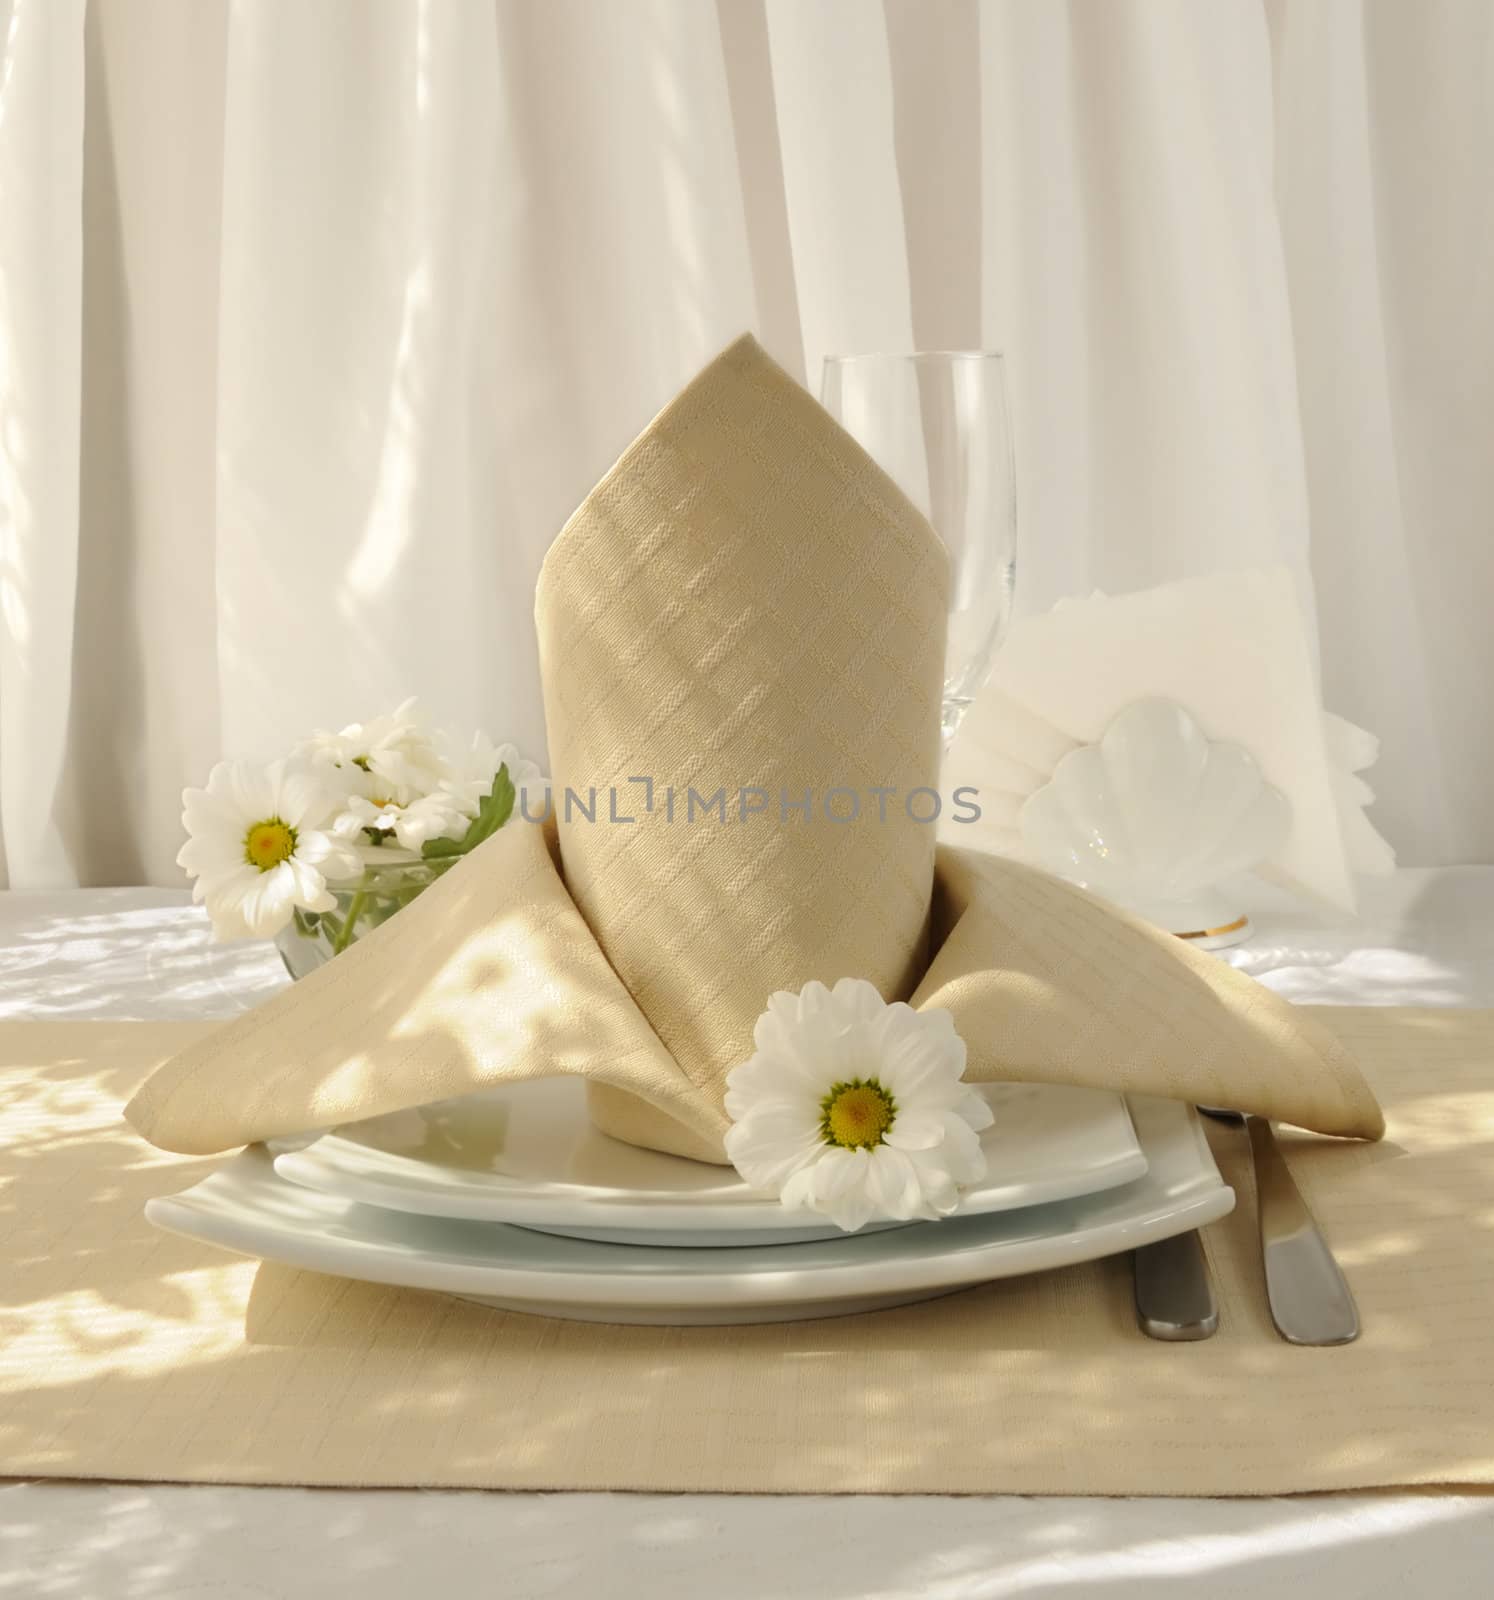 Coordinated decorative napkin on a plate with cutlery